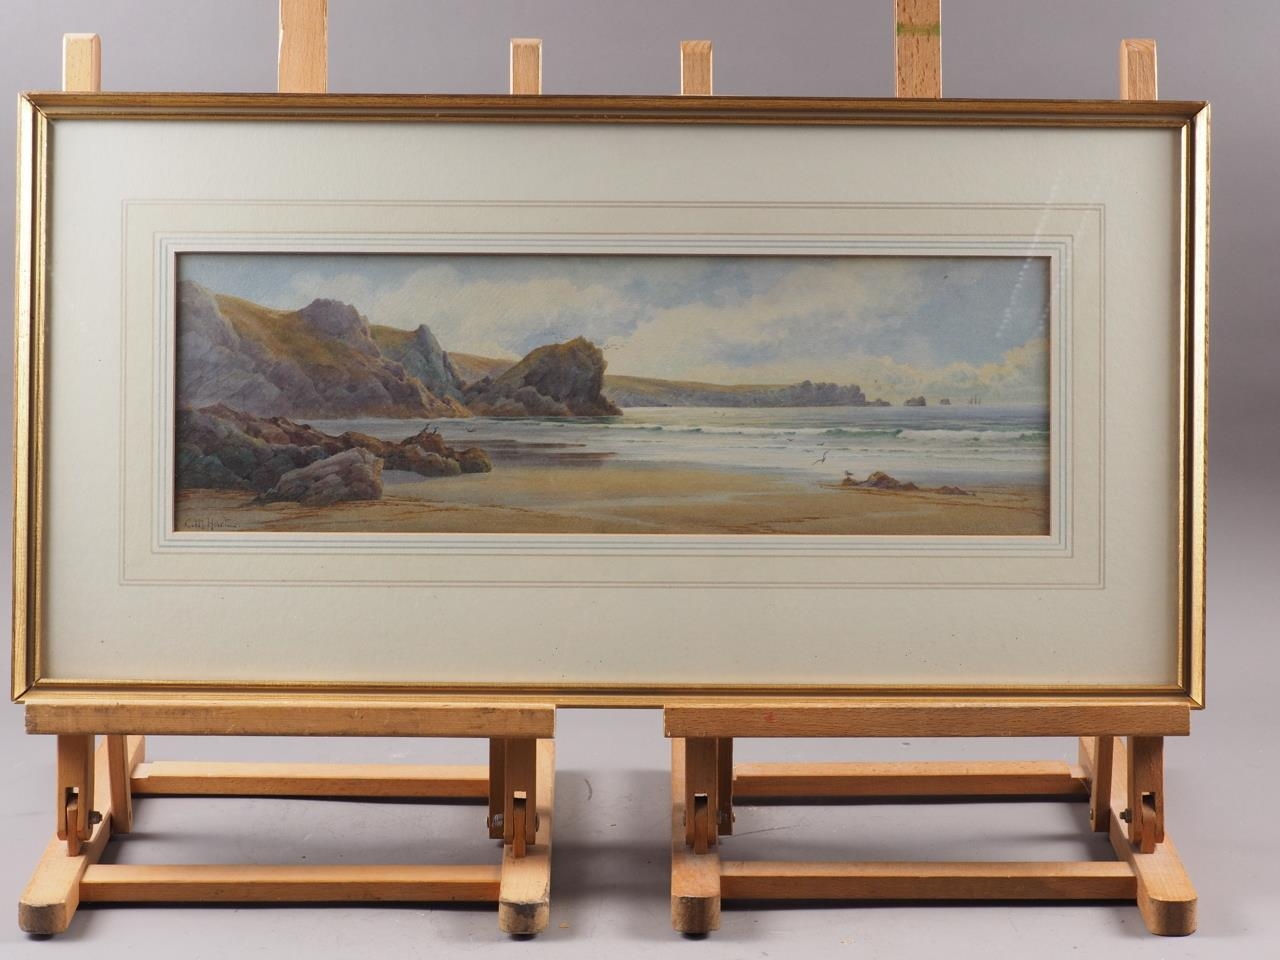 C M Hart: watercolours, "The Lion Rock and Lizard Head Kinance Cove", 6 1/4" x 20 1/2", in wash line